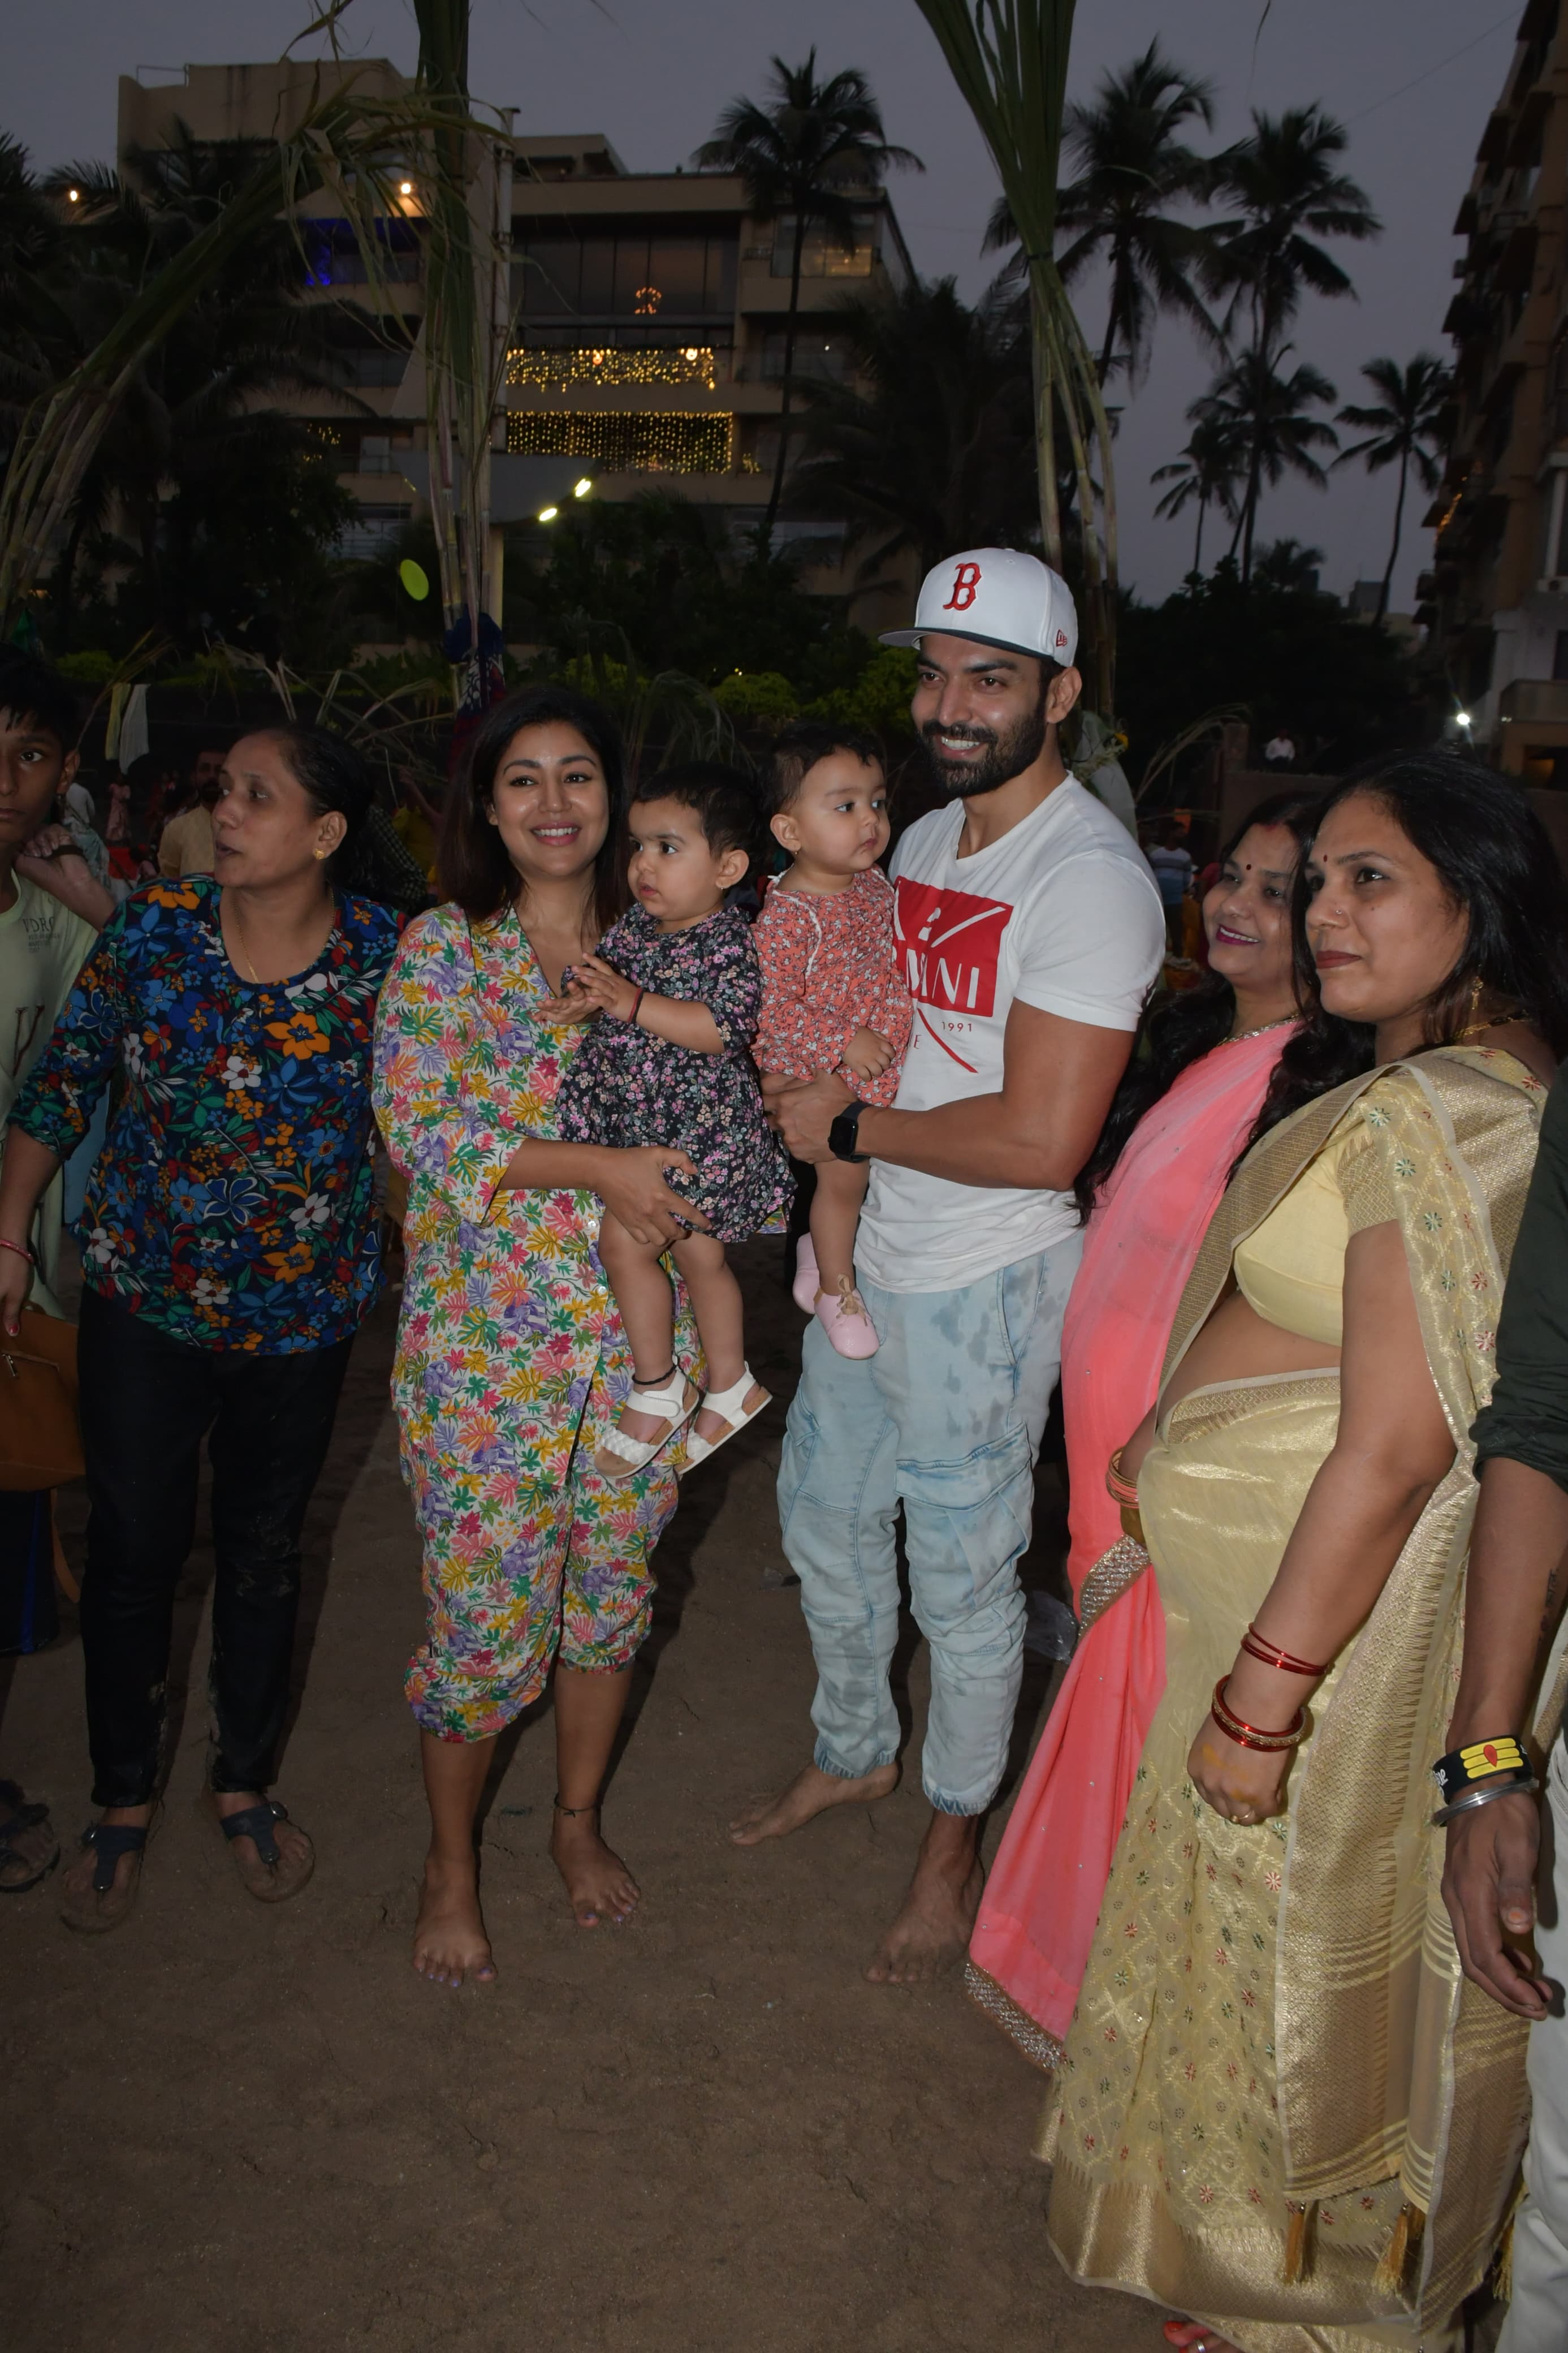 Gurmeet Chaudhary and Debina Bonnerjee were snapped at a beach with their family